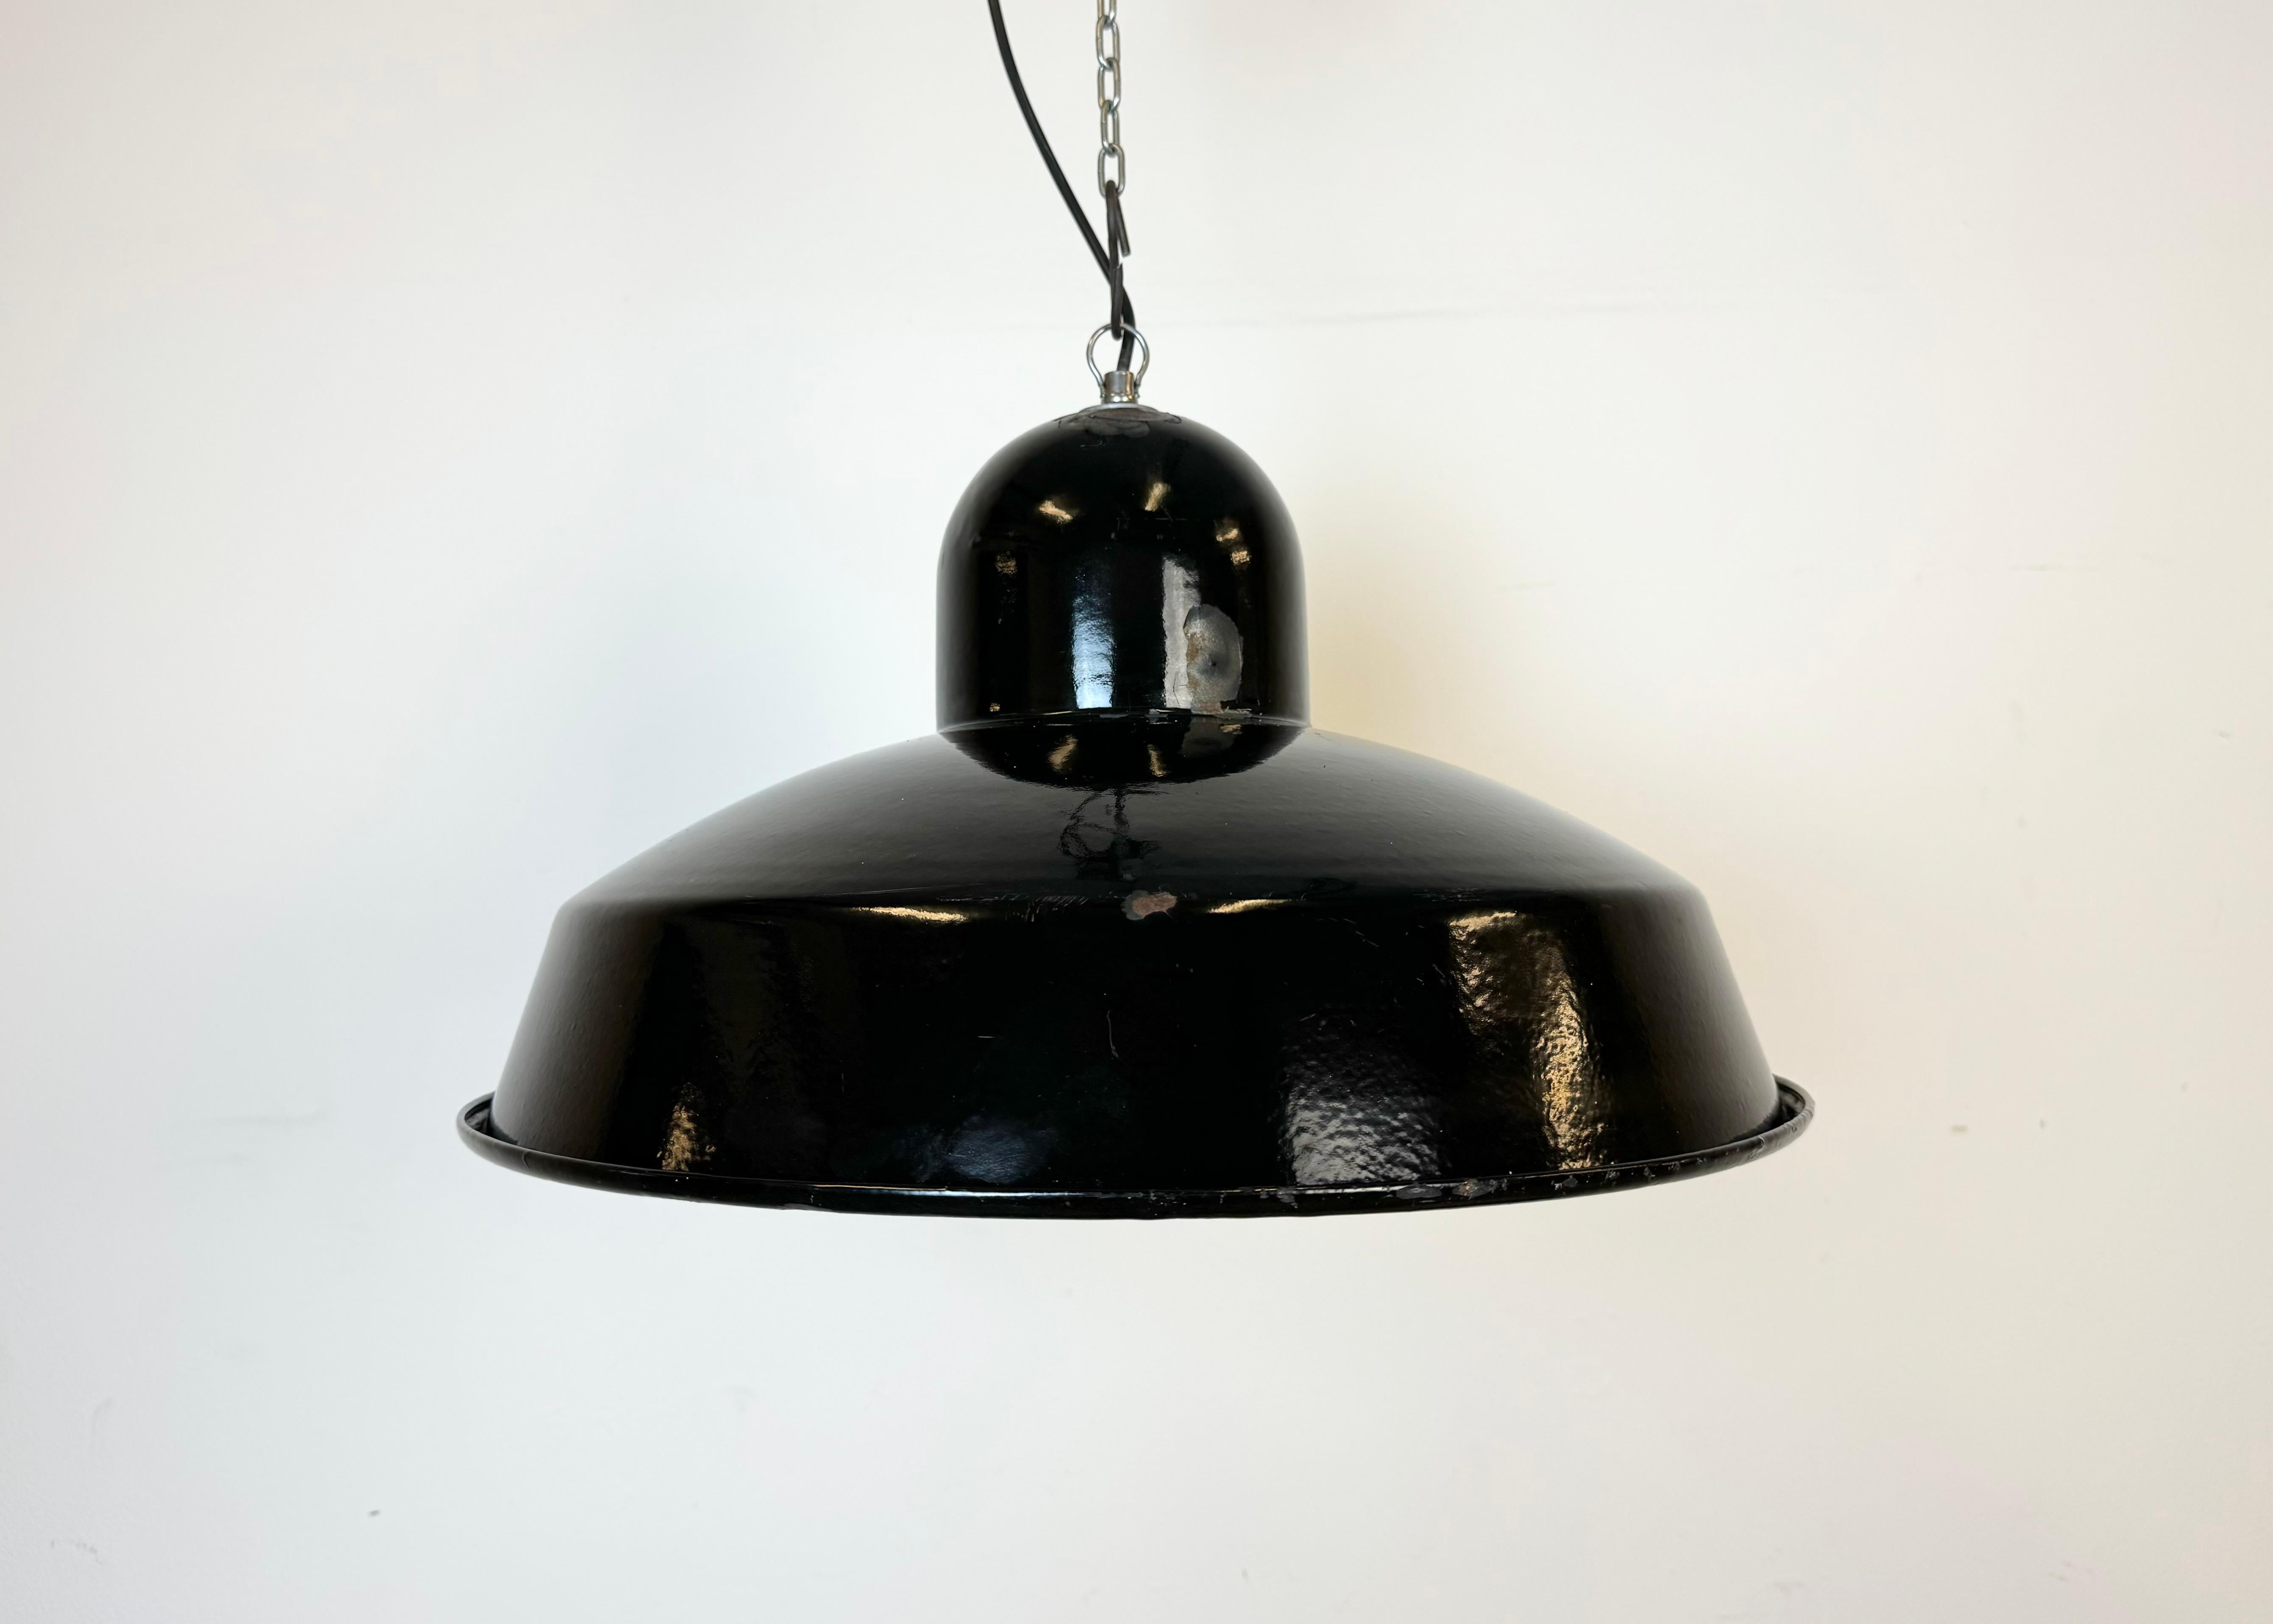 Industrial factory hanging lamp made in Portugal during the 1960s. It features a black enamel shade with white enamel interior and an iron top. New  socket requires standard E 27/ E 26 light bulbs. New wire. The lamp weighs 2 kg. The lampshade